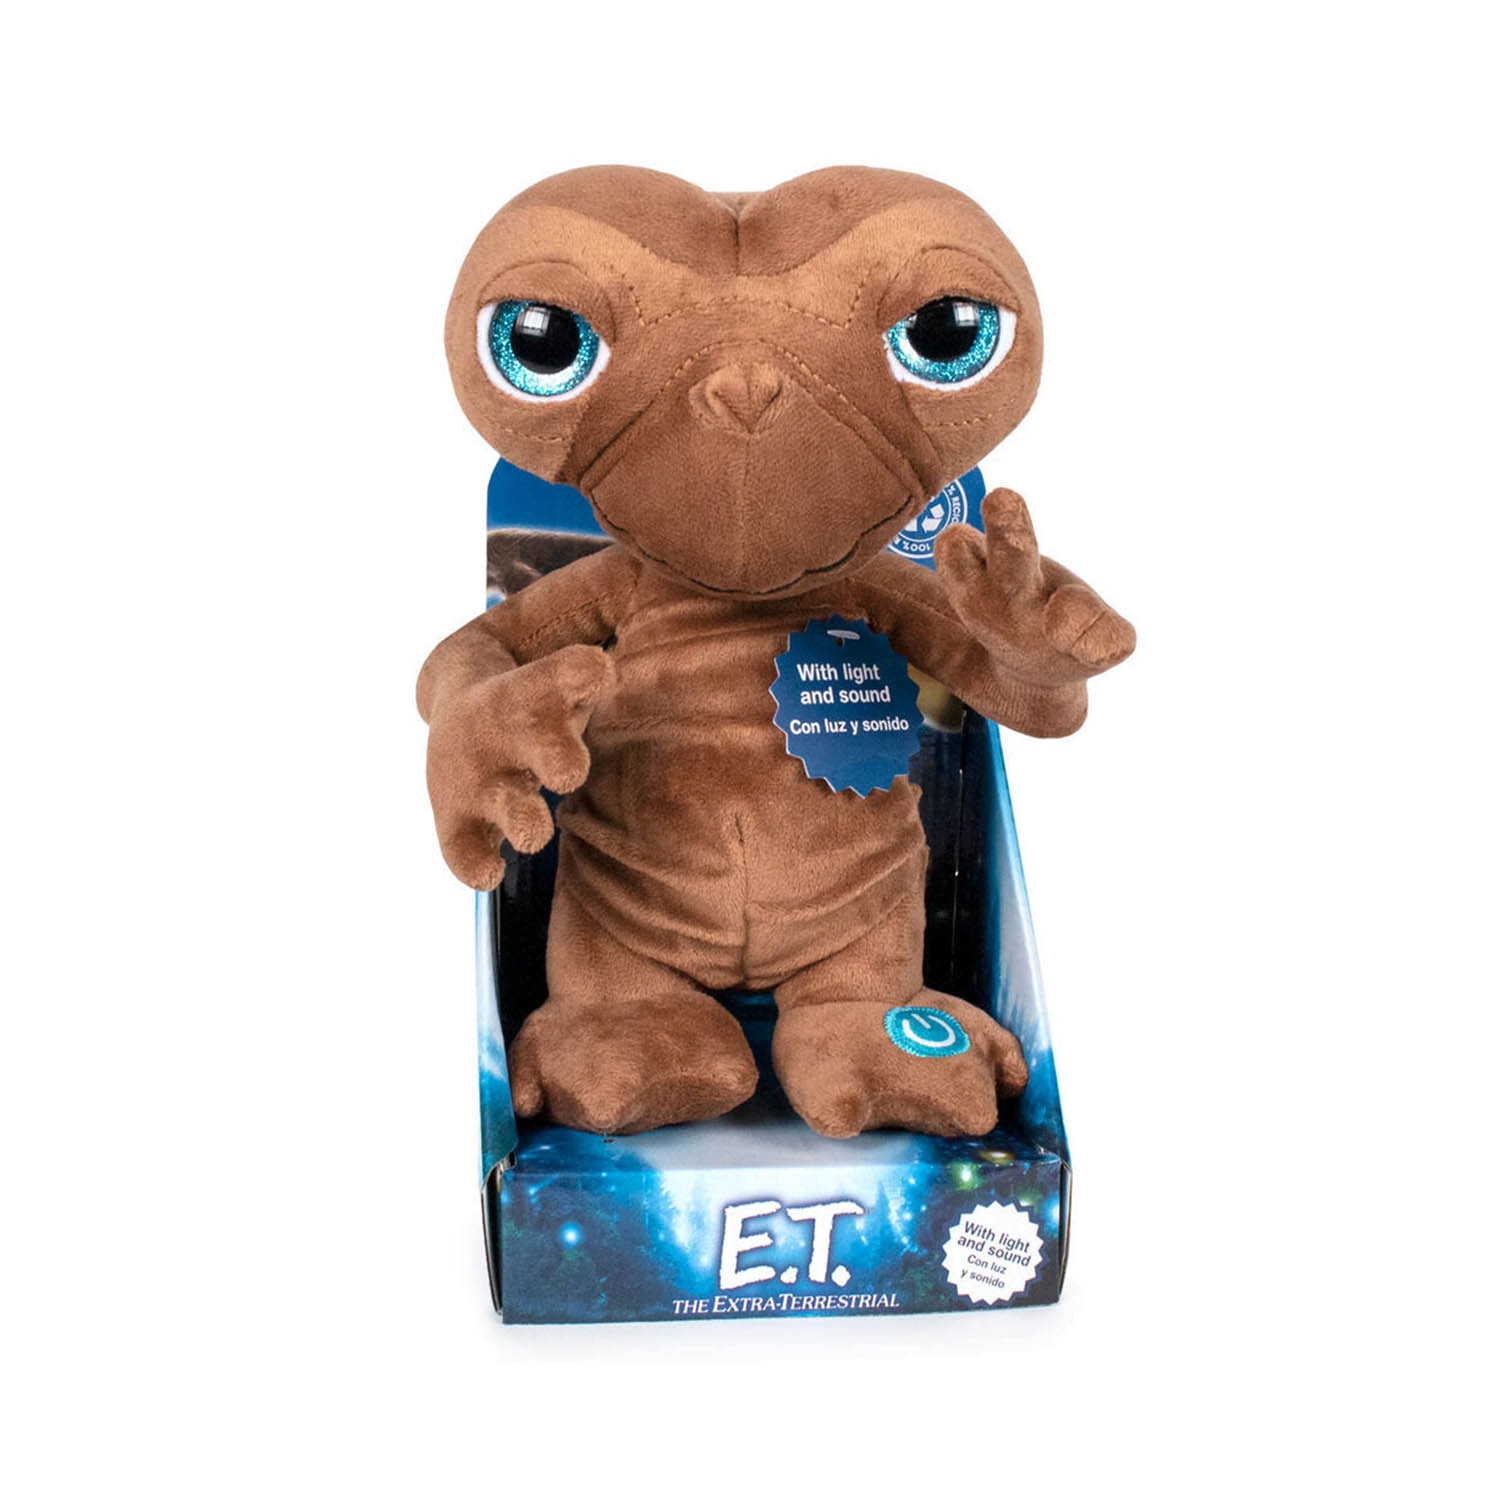 _0001_et-et-plush-toy-with-sound-and-lights